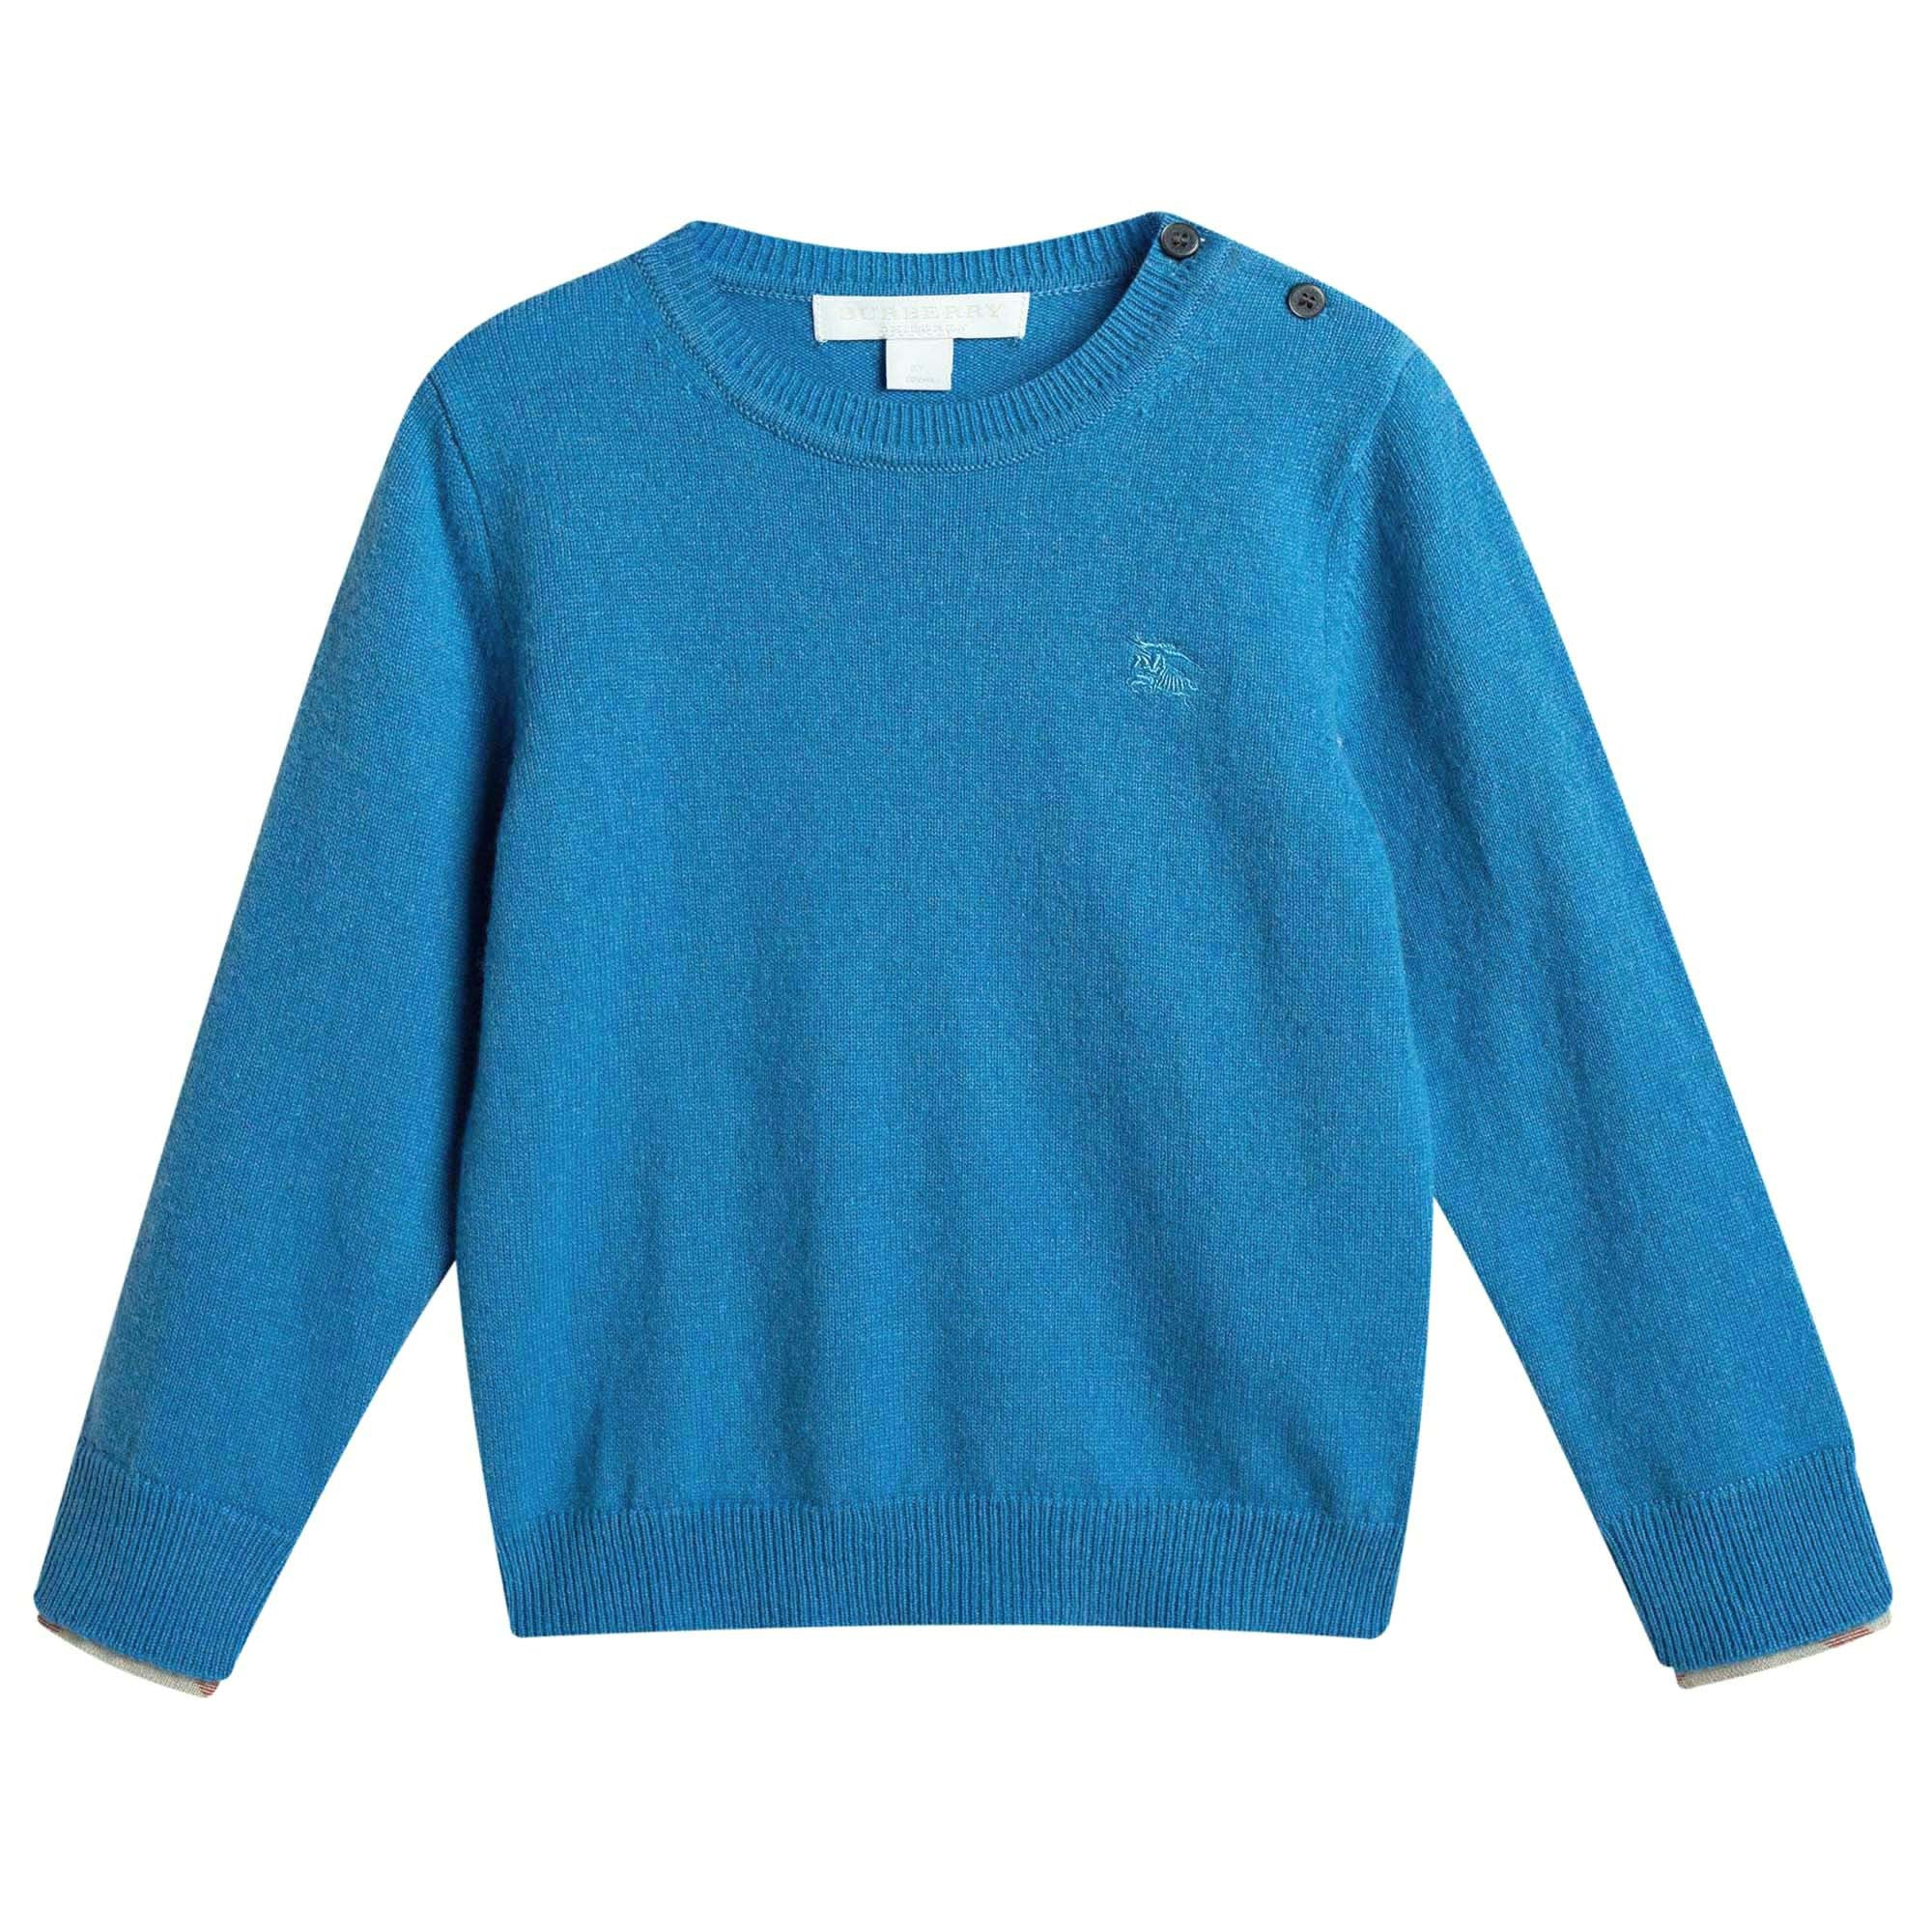 Baby Boys Light Blue Cashmere Knitted Sweater - CÉMAROSE | Children's Fashion Store - 1